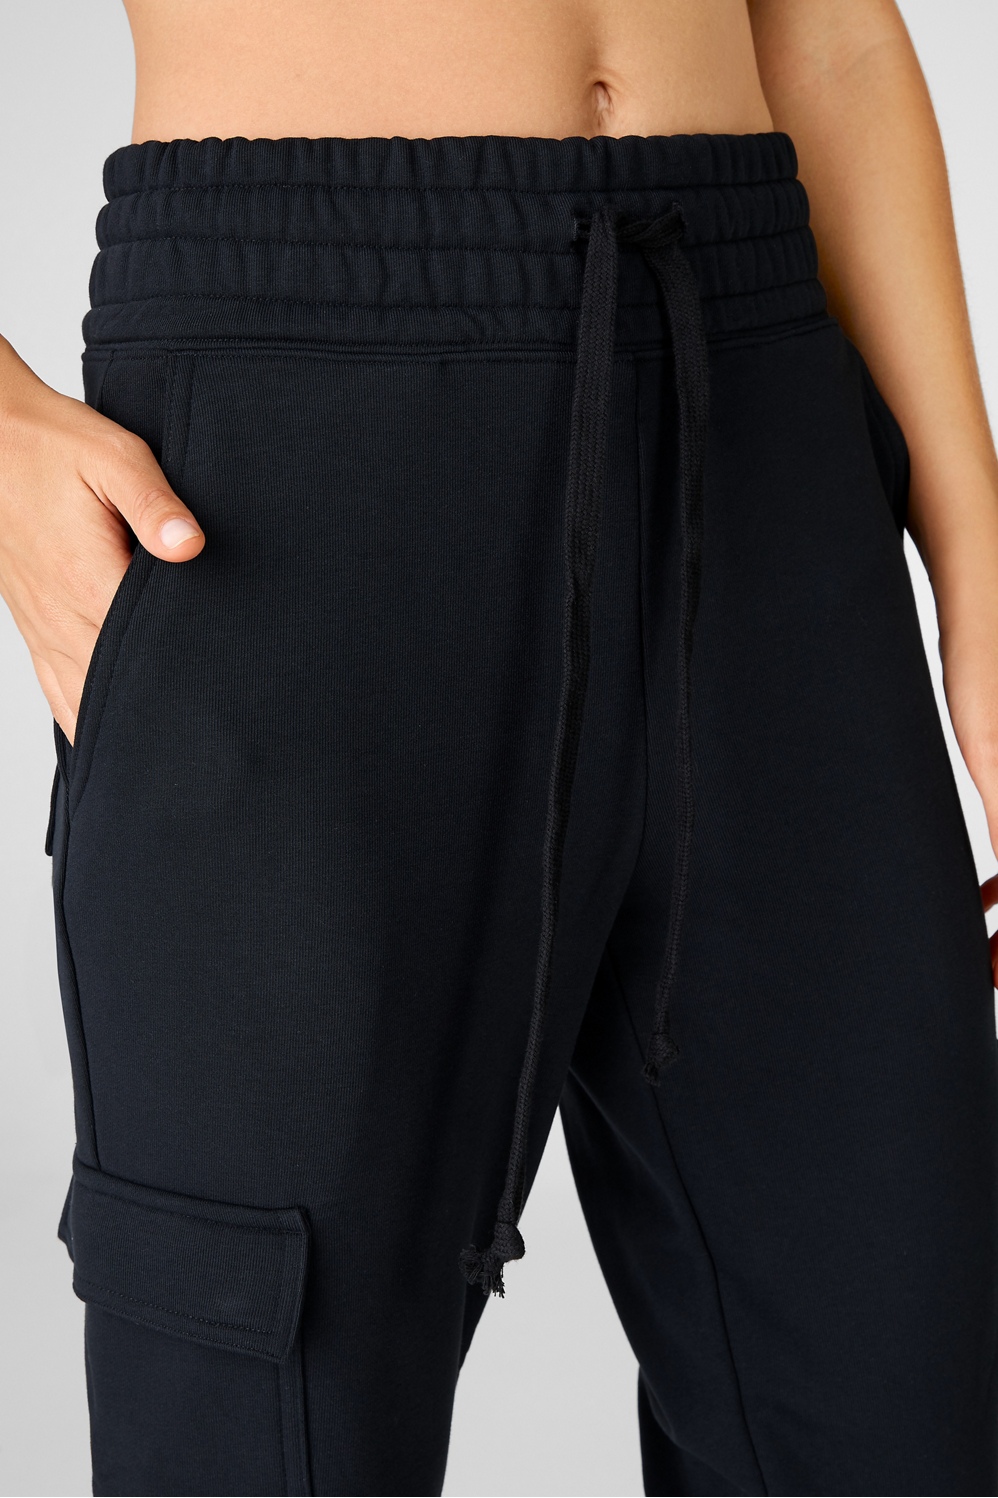 Victoria's Secret Leggings on Sale! Select Styles As low As $17.47!